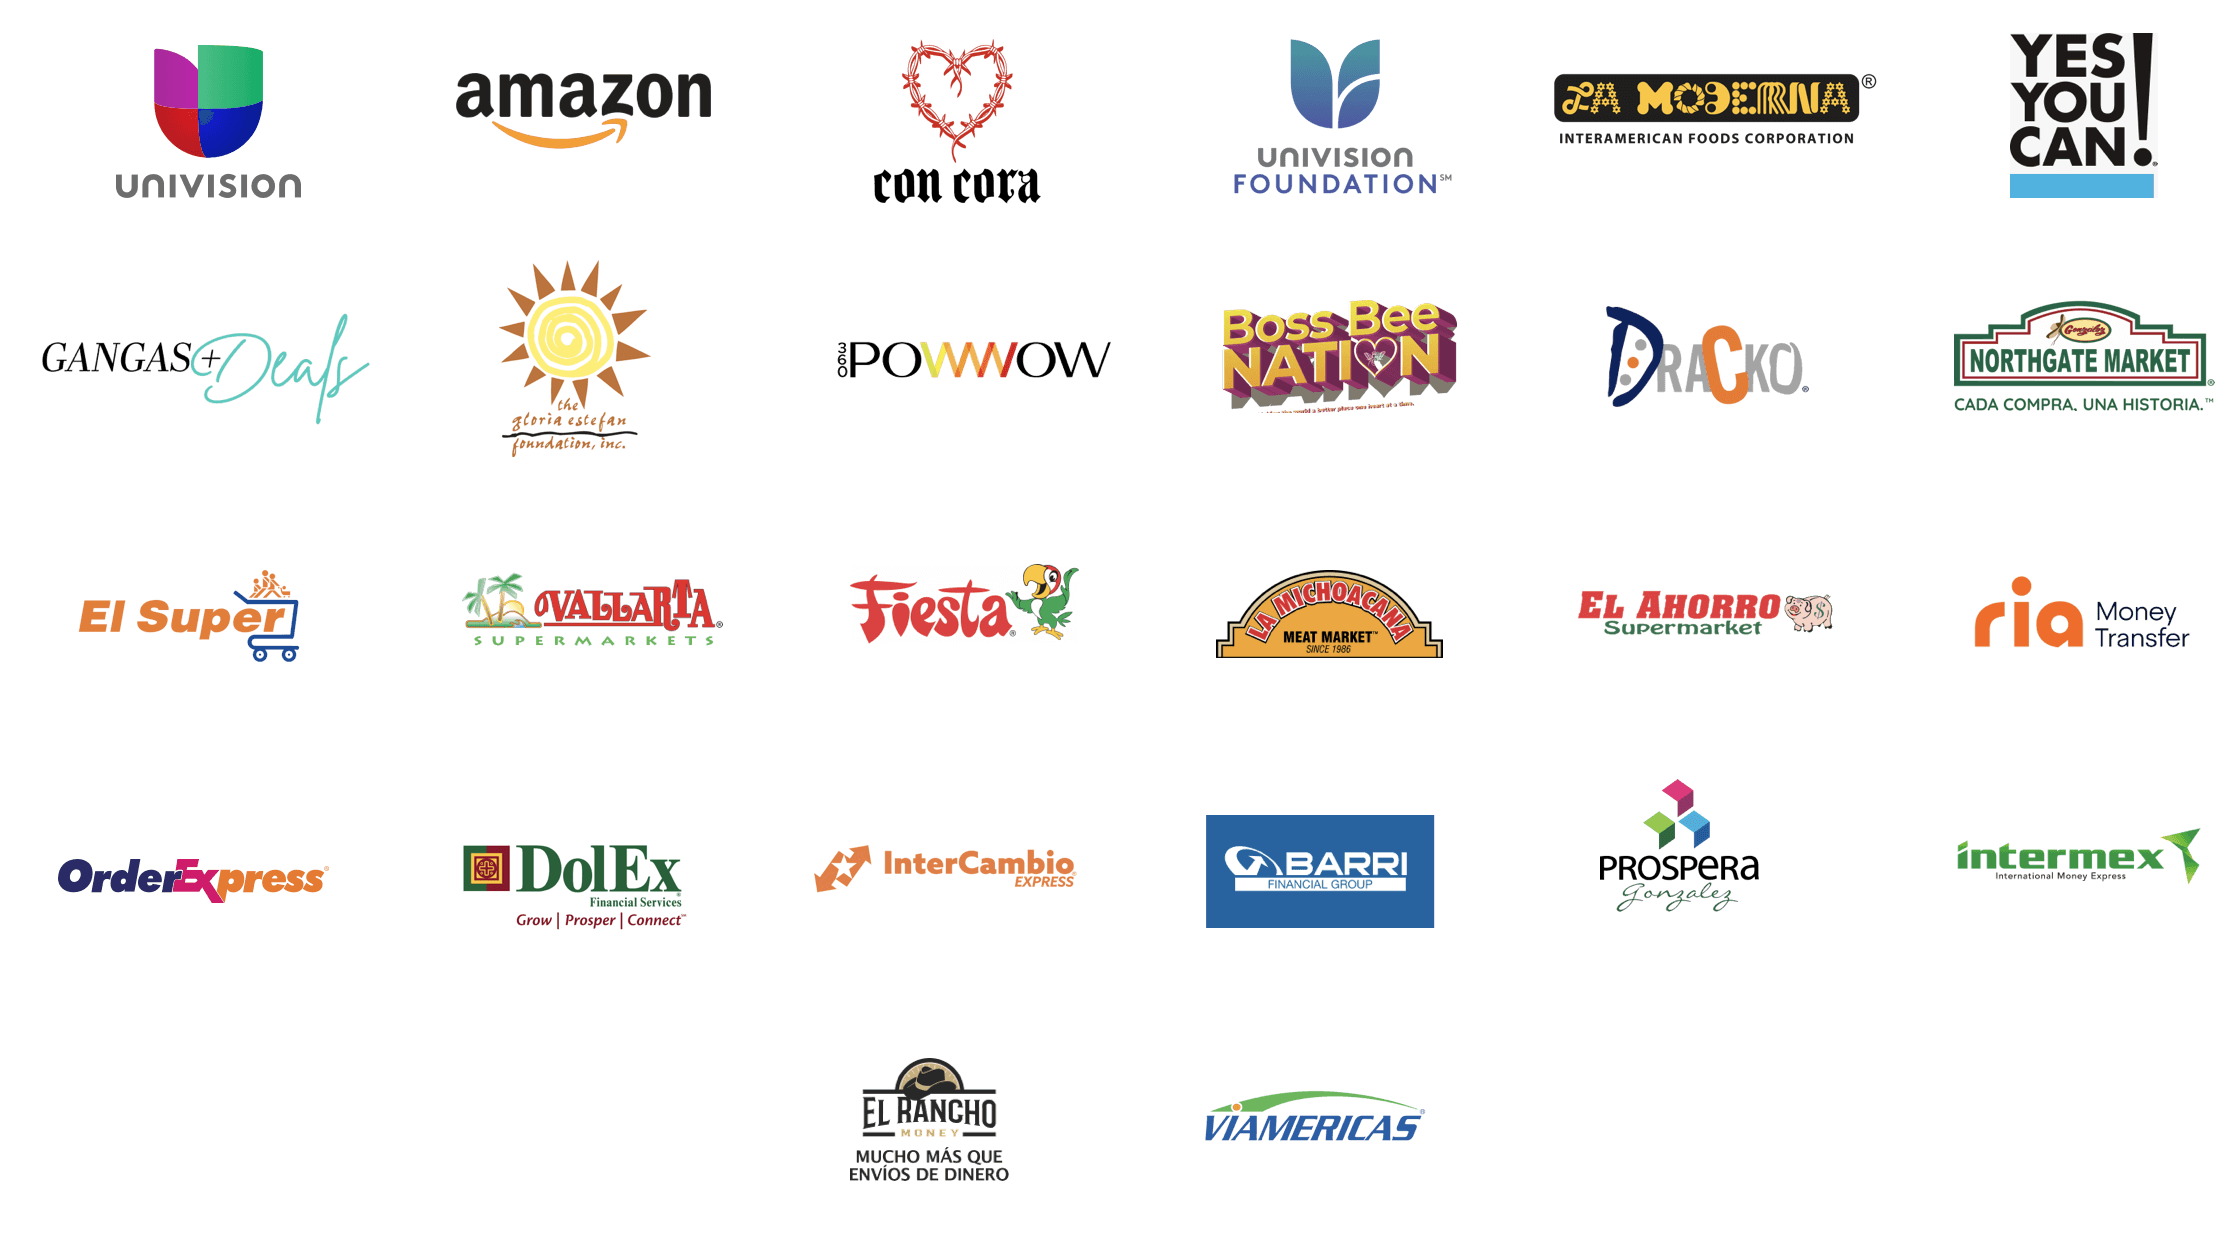 SPONSORS AND PARTNERS